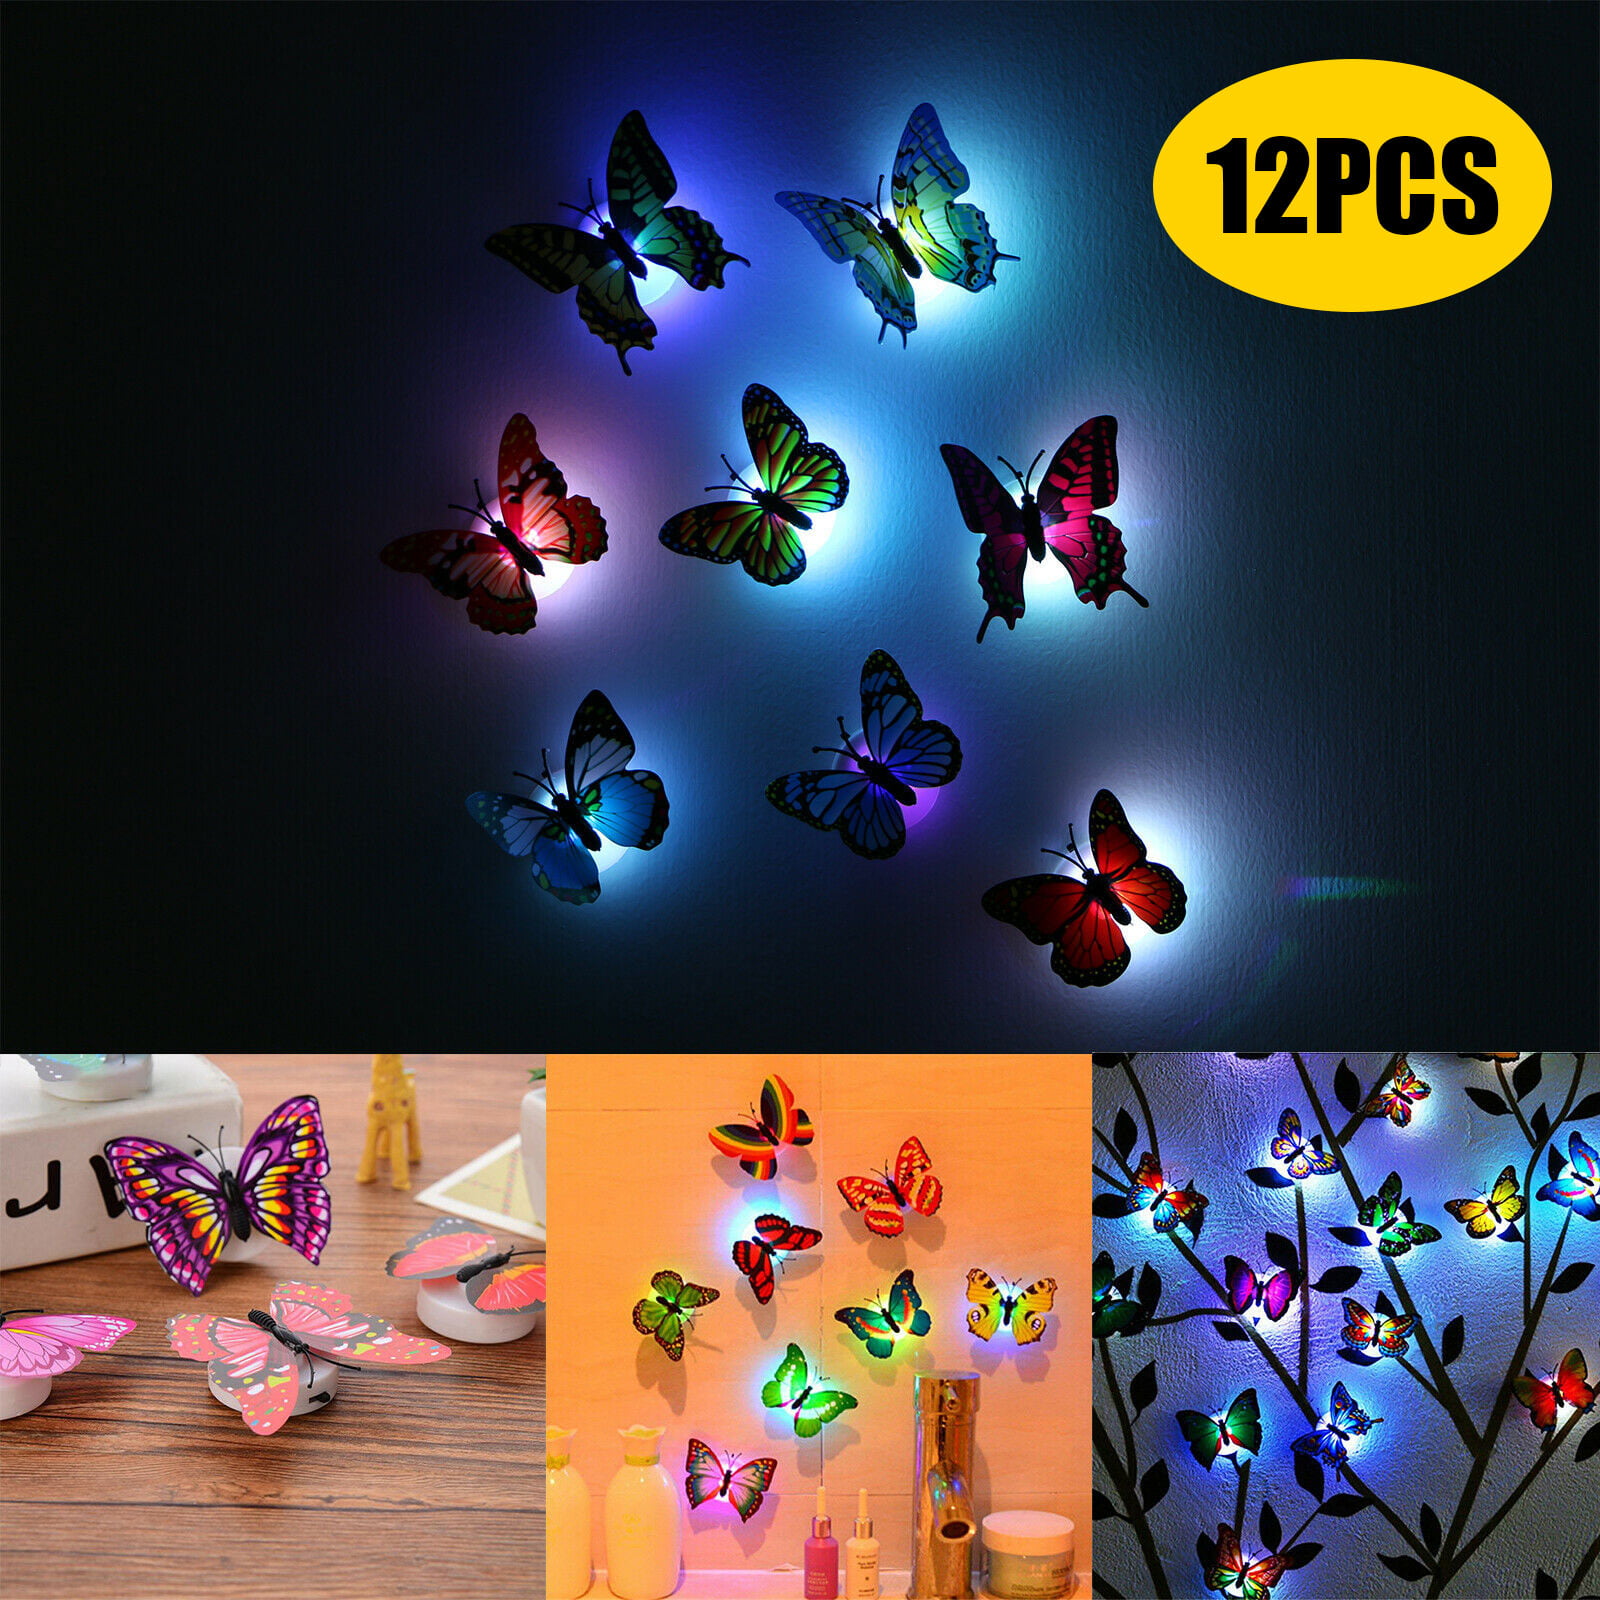 12Pcs Glowing 3D Butterfly LED Wall Stickers Night Light Bedroom DIY Home Decor 